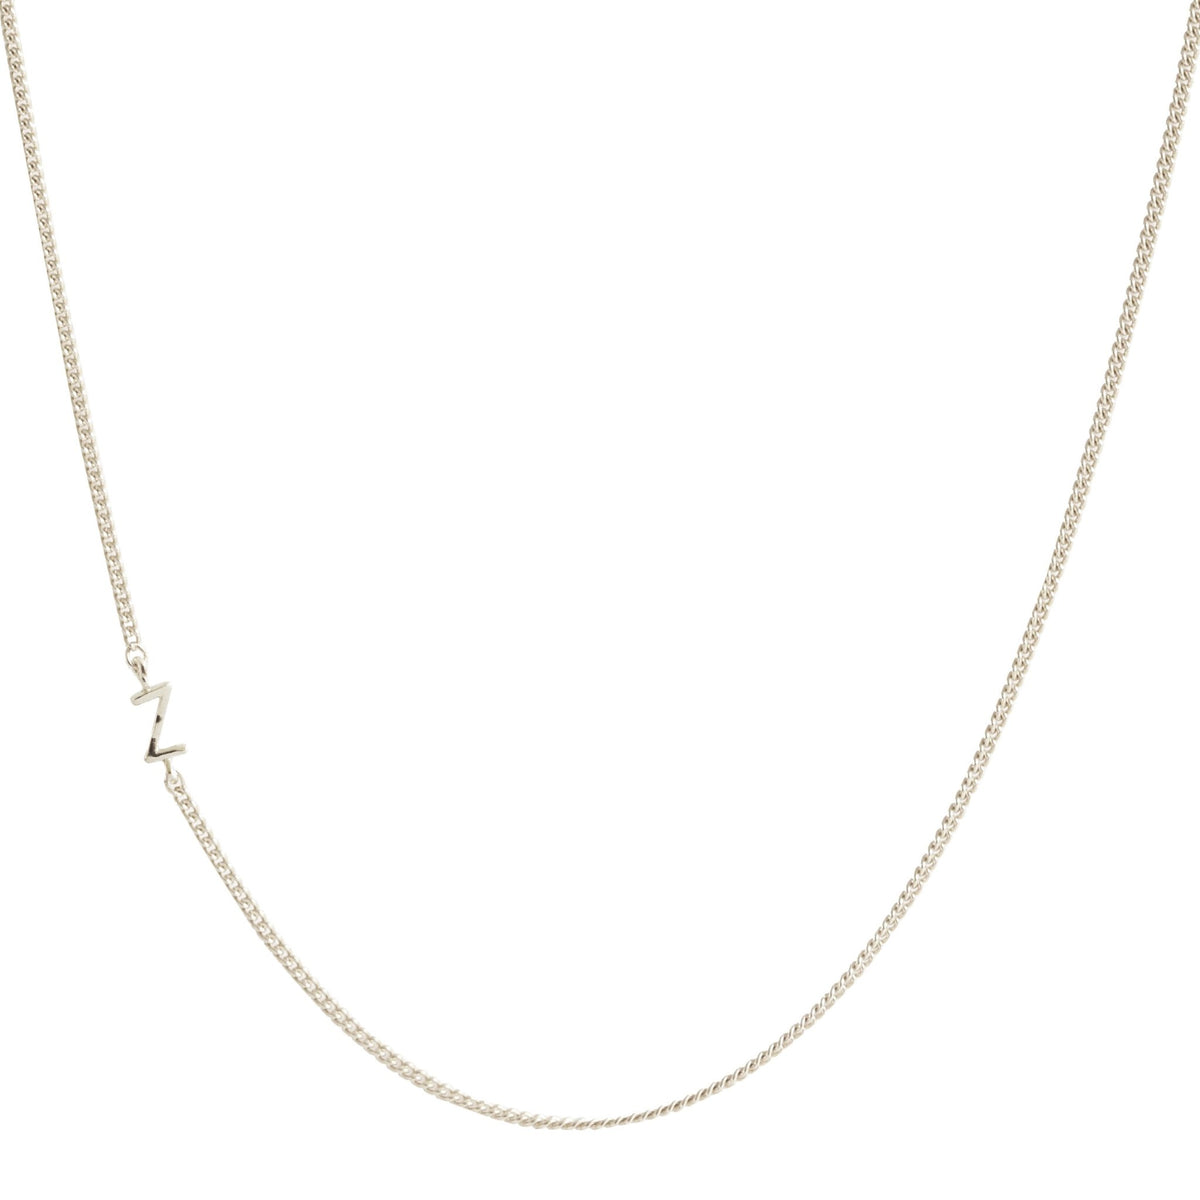 NOTABLE OFFSET INITIAL NECKLACE - Z - GOLD, ROSE GOLD, OR SILVER - SO PRETTY CARA COTTER